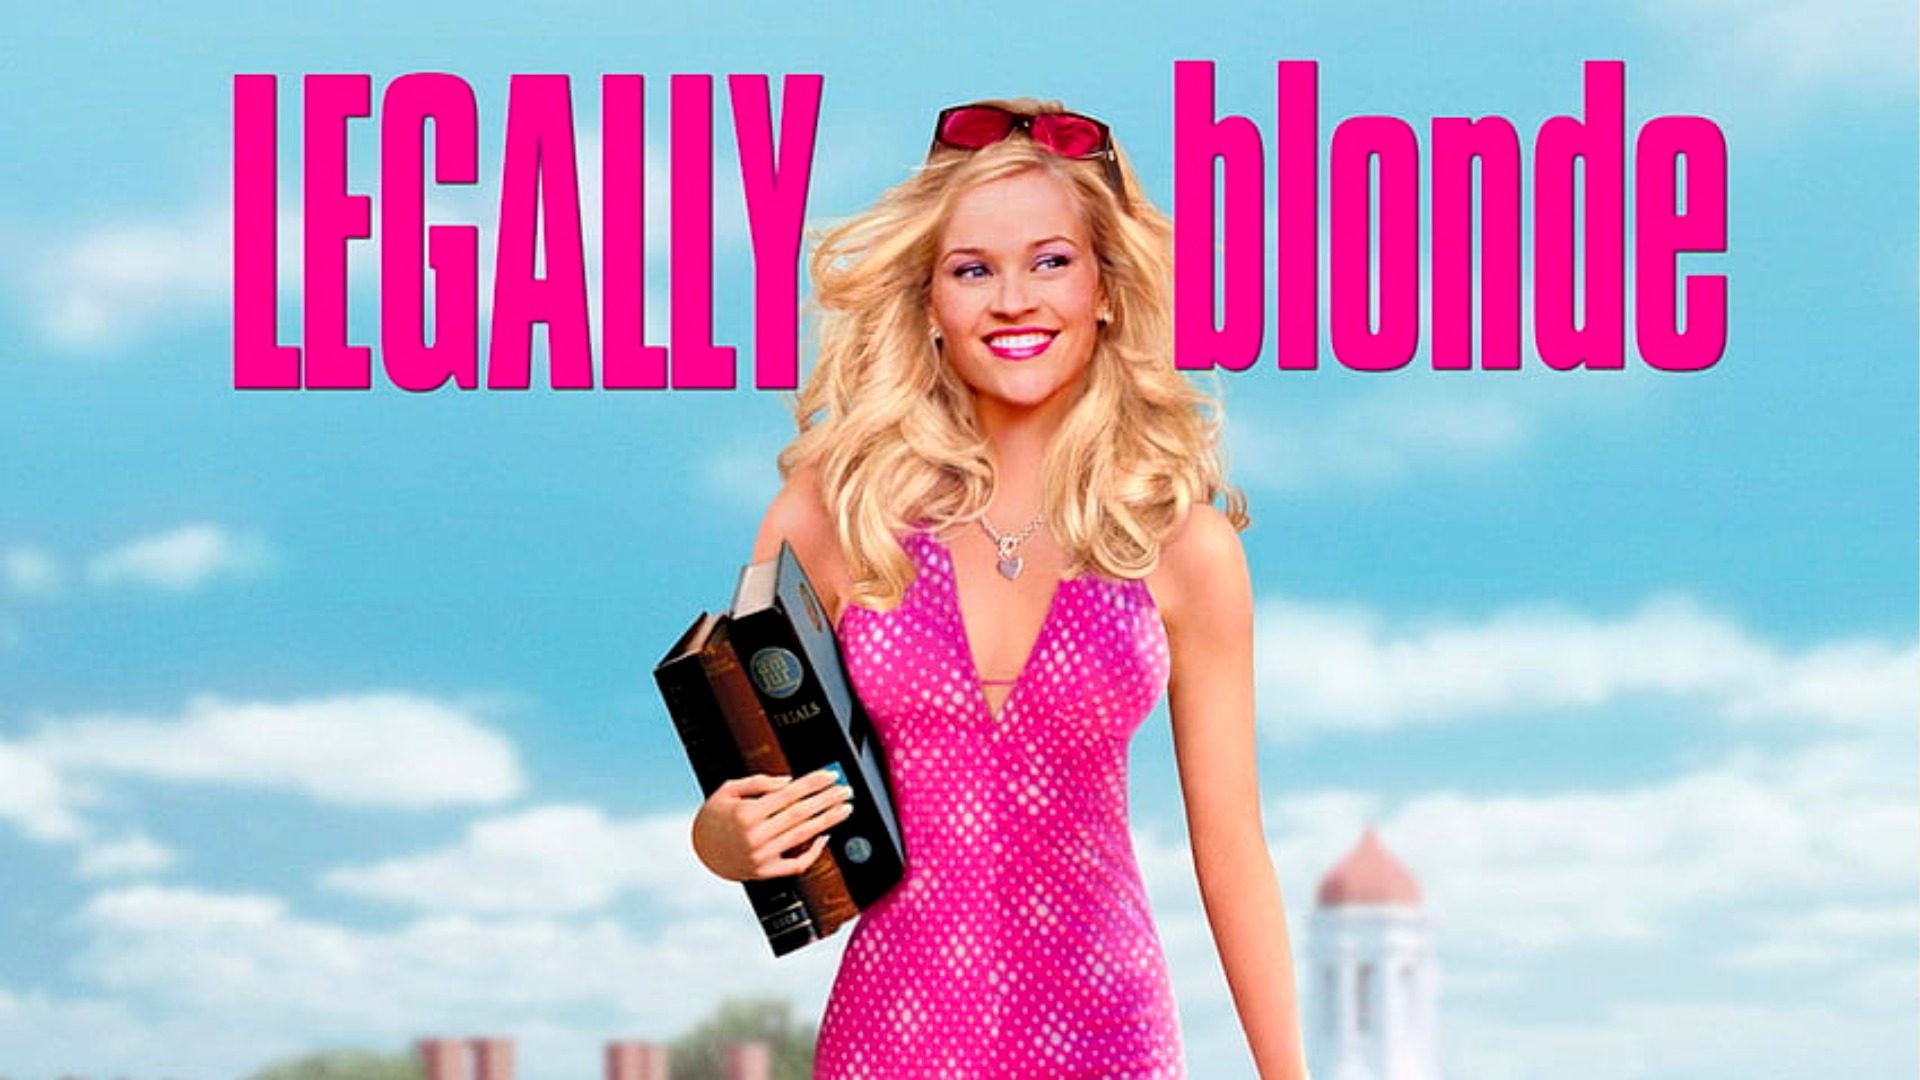 #Elle: Prime Video Orders Legally Blonde Prequel Series from Reese Witherspoon Company